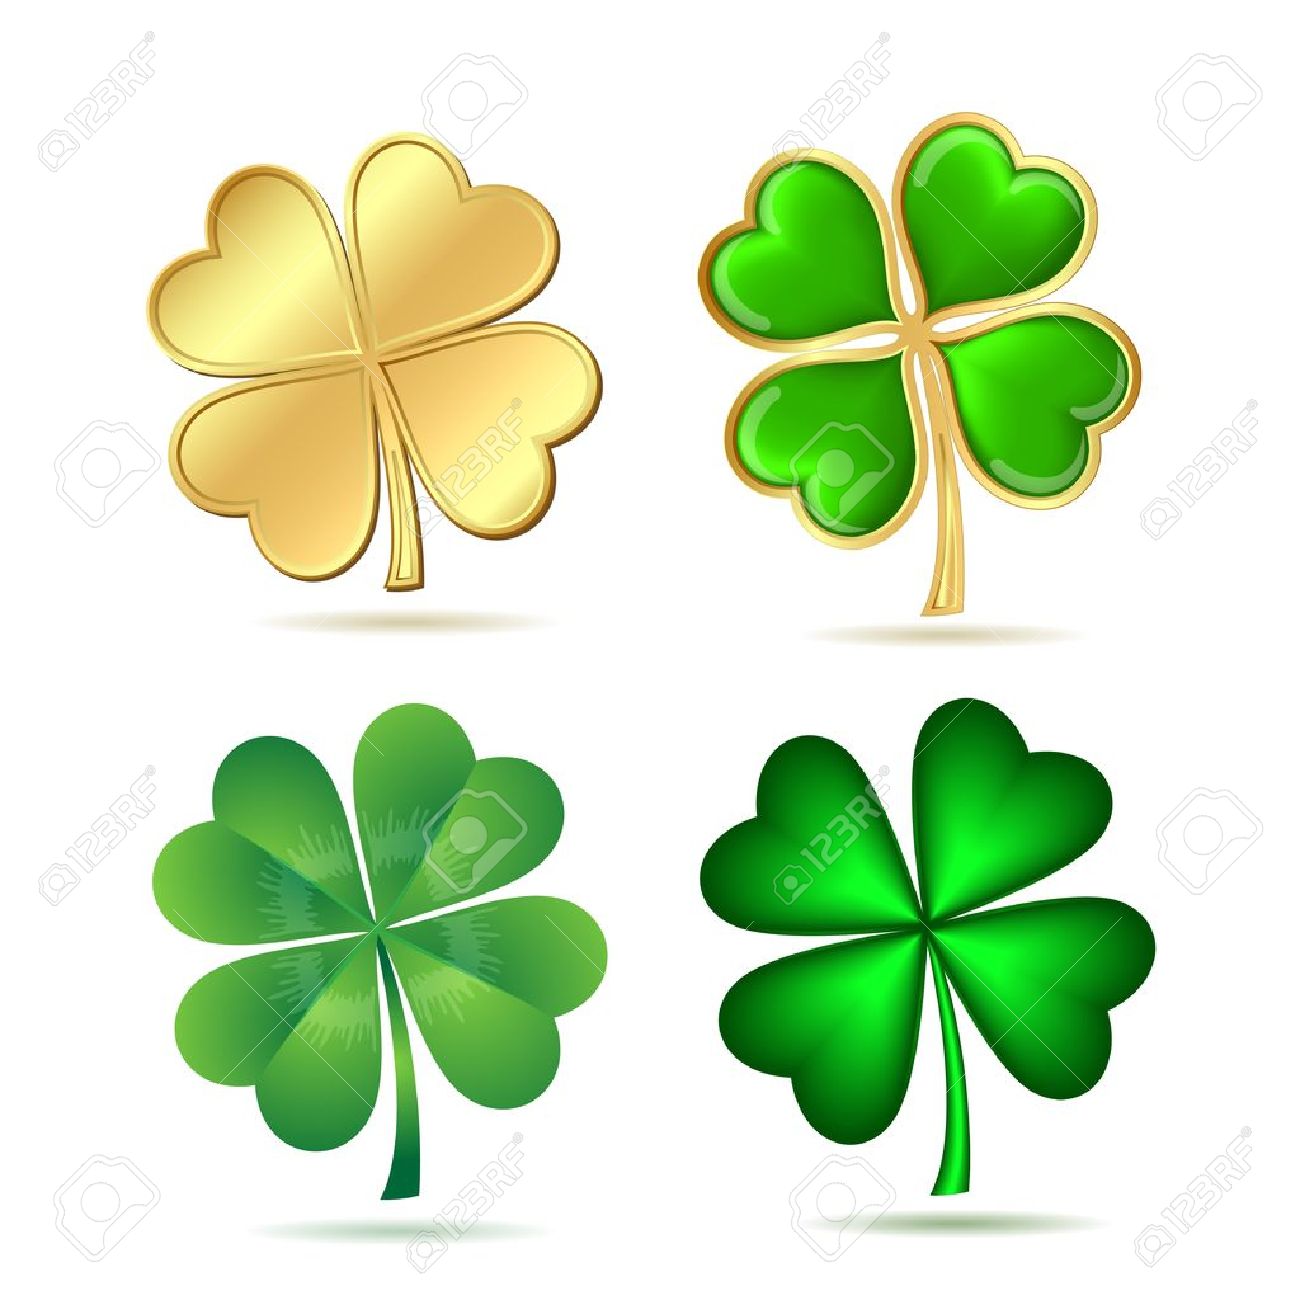 9,247 Clover Flower Stock Vector Illustration And Royalty Free.